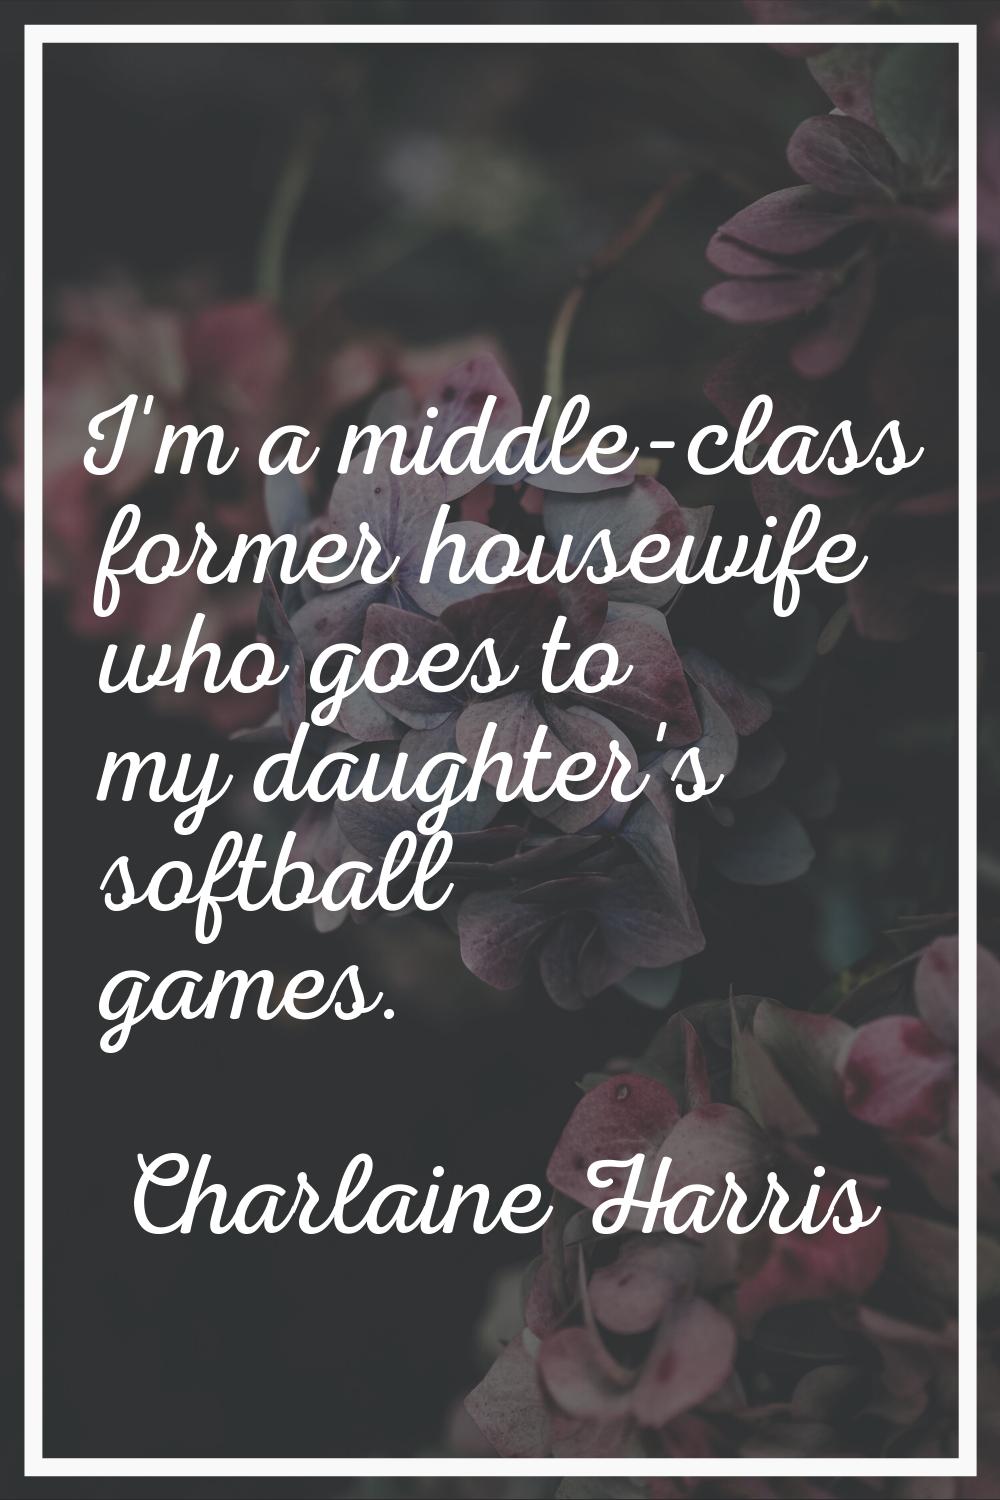 I'm a middle-class former housewife who goes to my daughter's softball games.